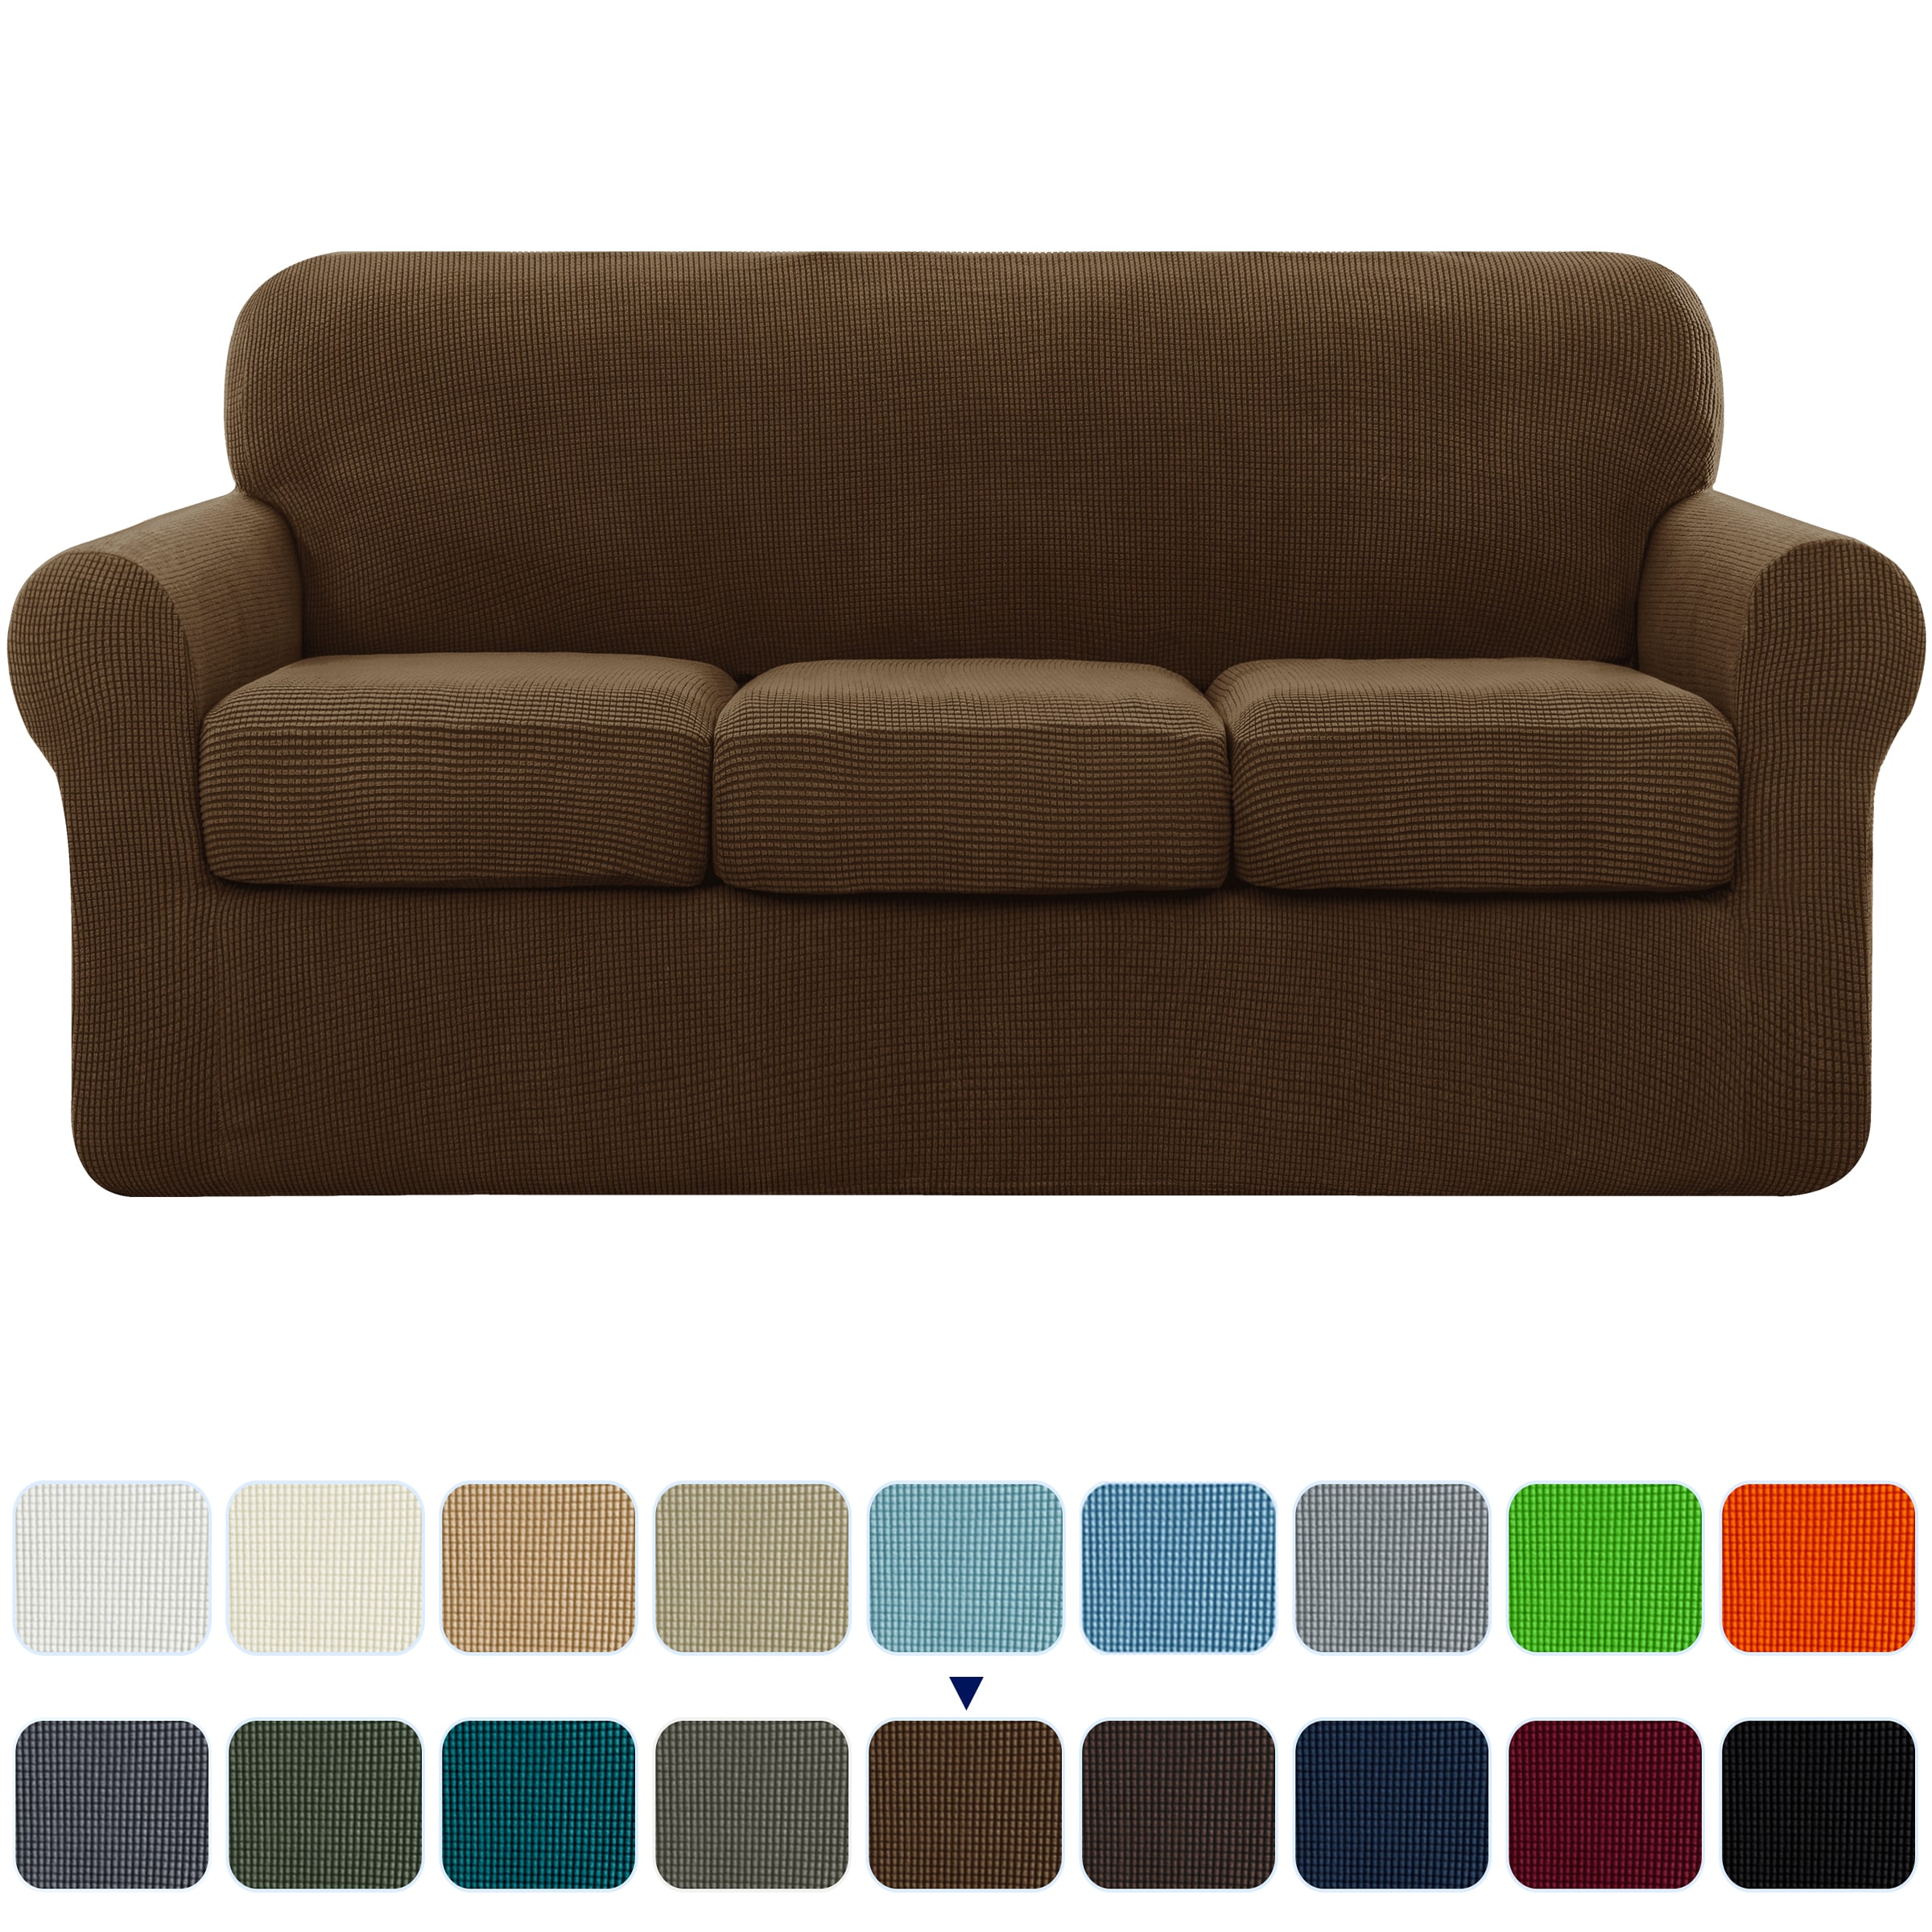 Besparing Duplicaat Norm Sofa Slipcovers at Lowes.com